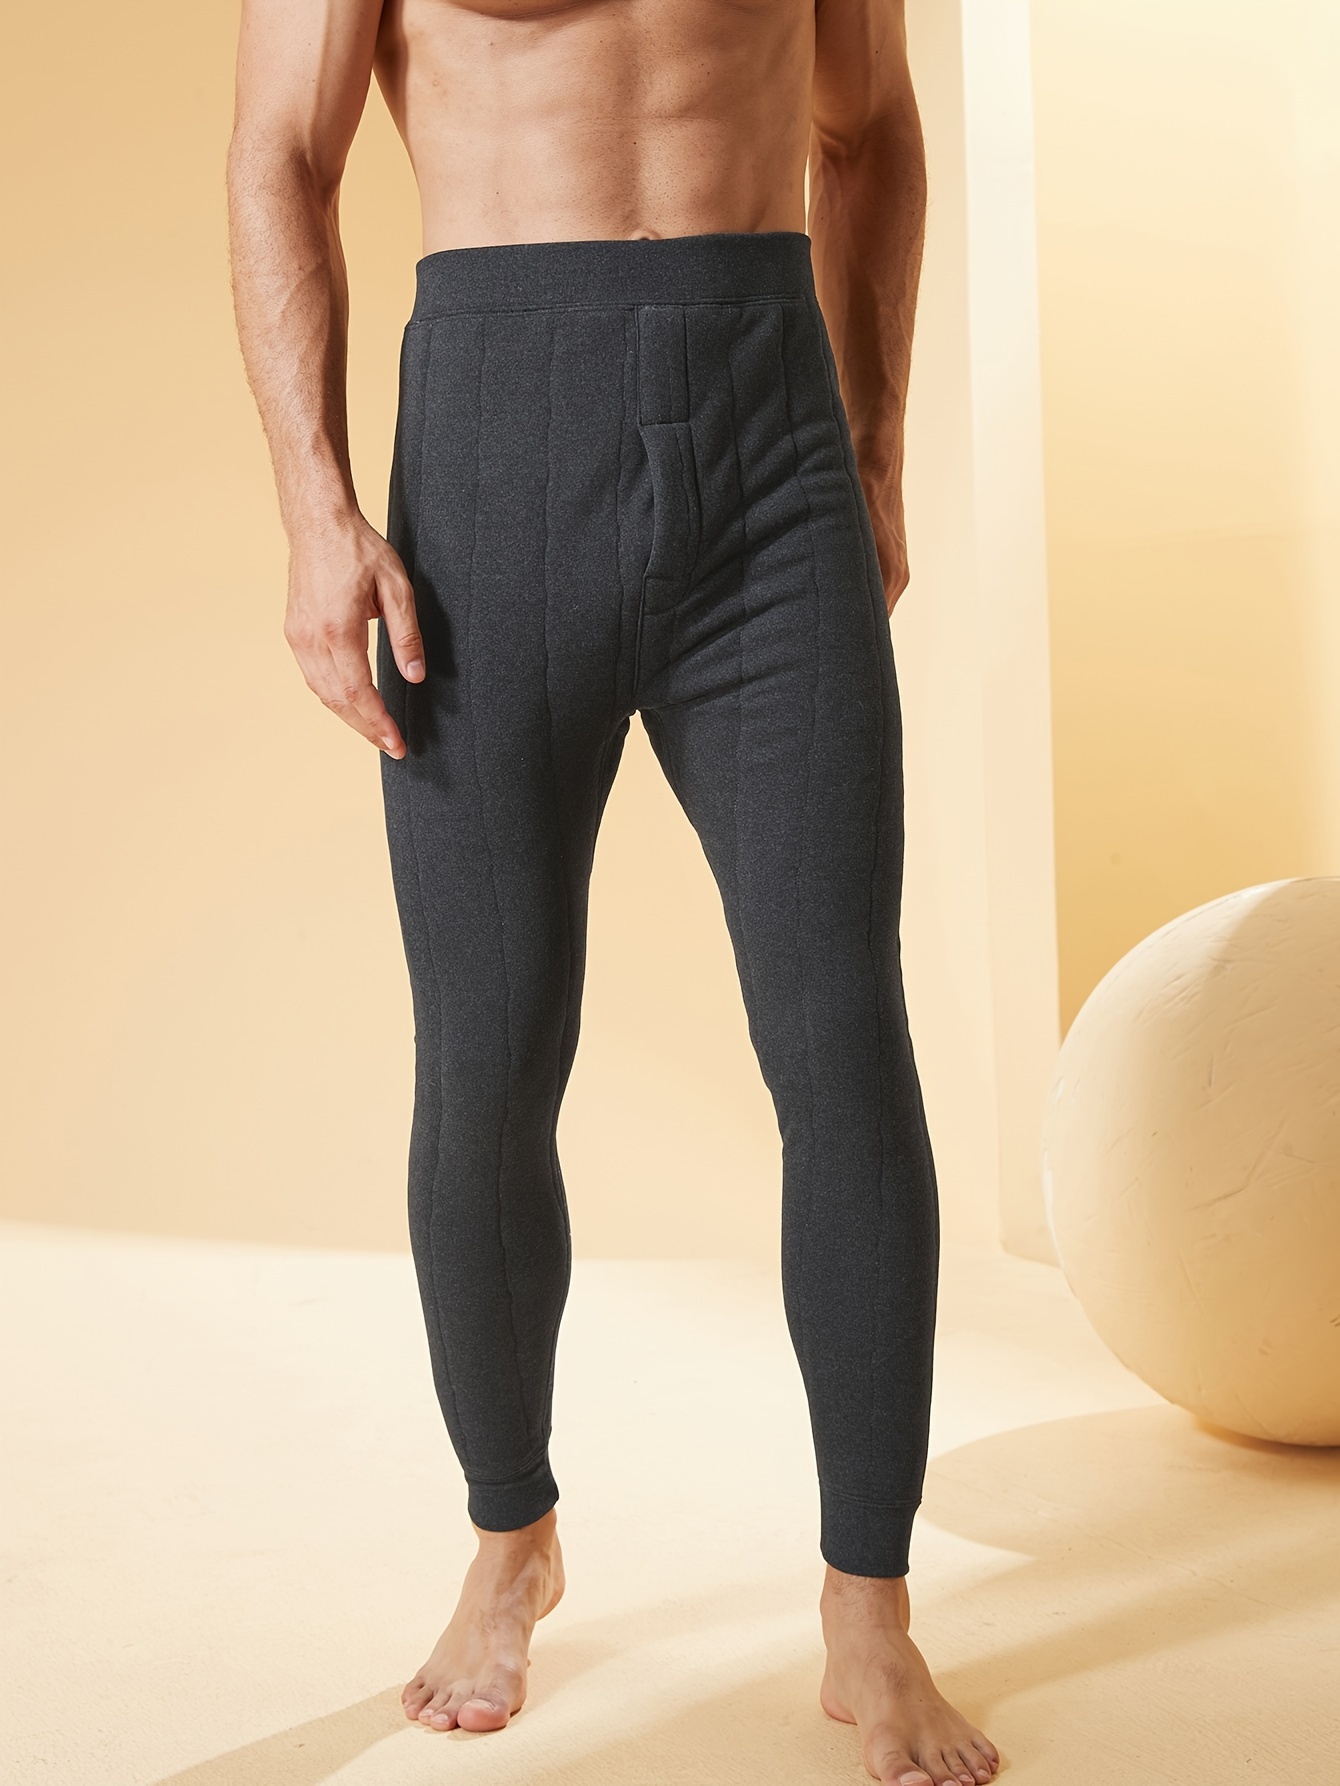 Winter Warm Leggings Men Thermal Pants Thick Tights Fleece-lined Trousers Plus  Size Thermo Underwear Man Comfortable Long Johns $1.648 - Wholesale China  Men's Thermal Wear at Factory Prices from Quanzhou Linkworld Import